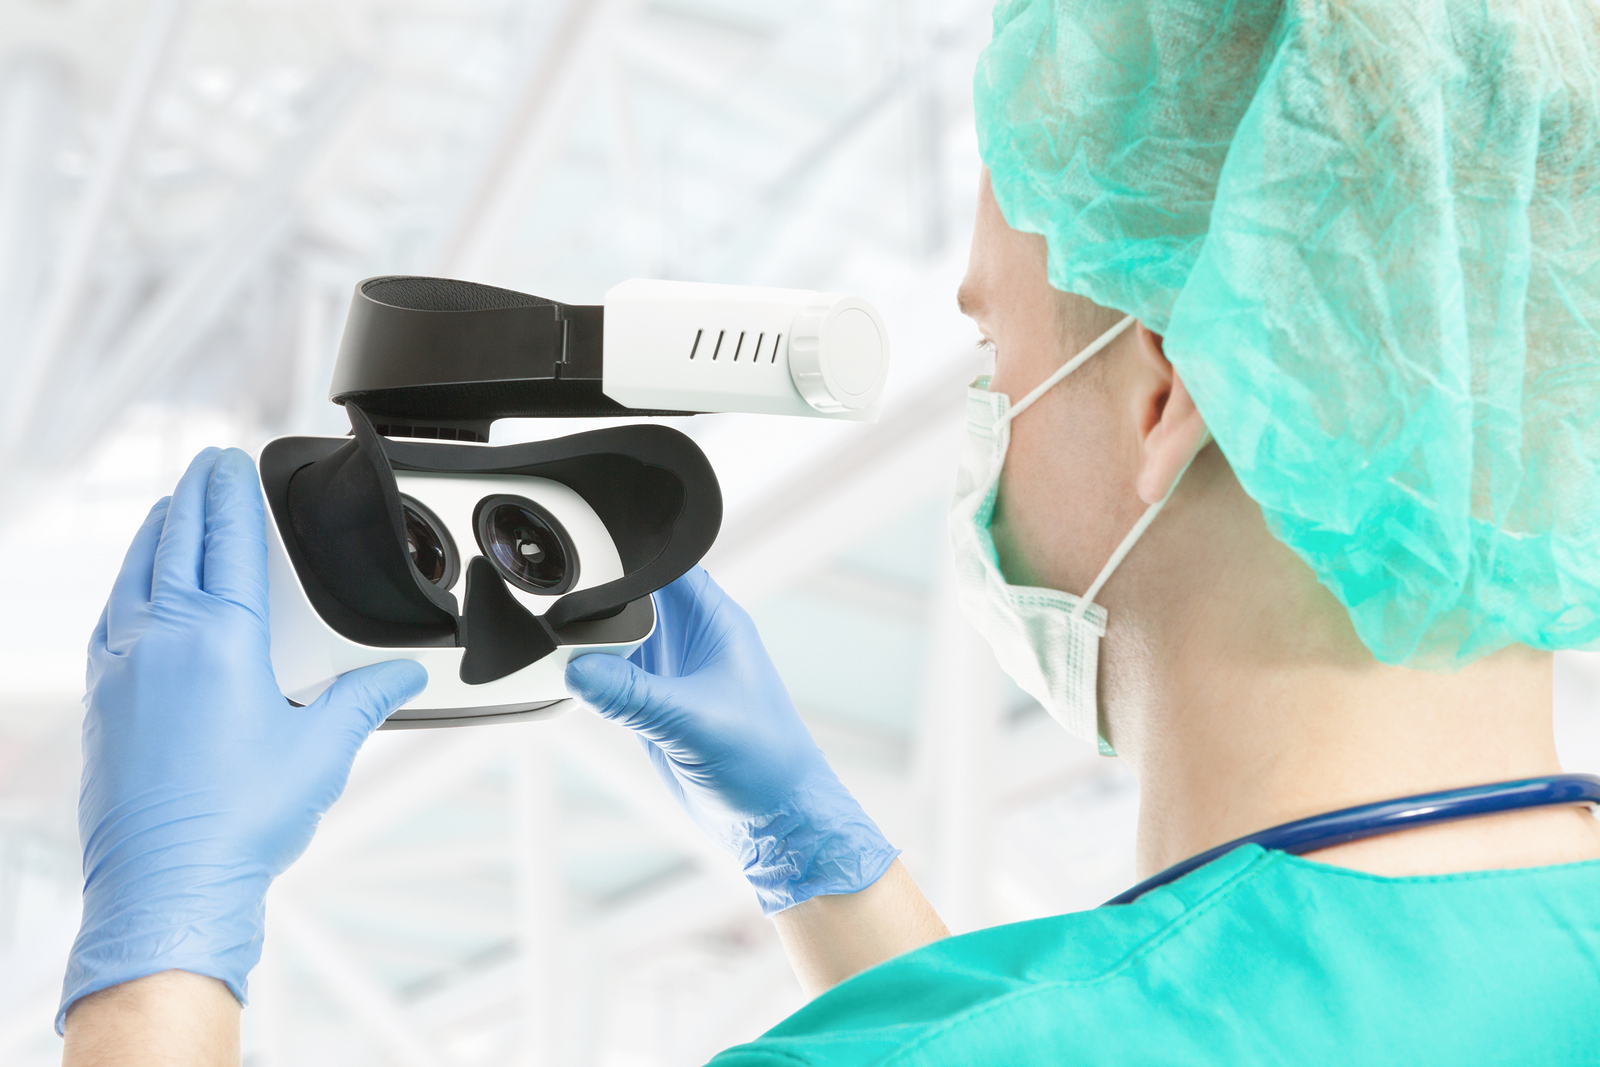 How virtual reality is implemented in medicine, and more [OurCrowd Newsletter]